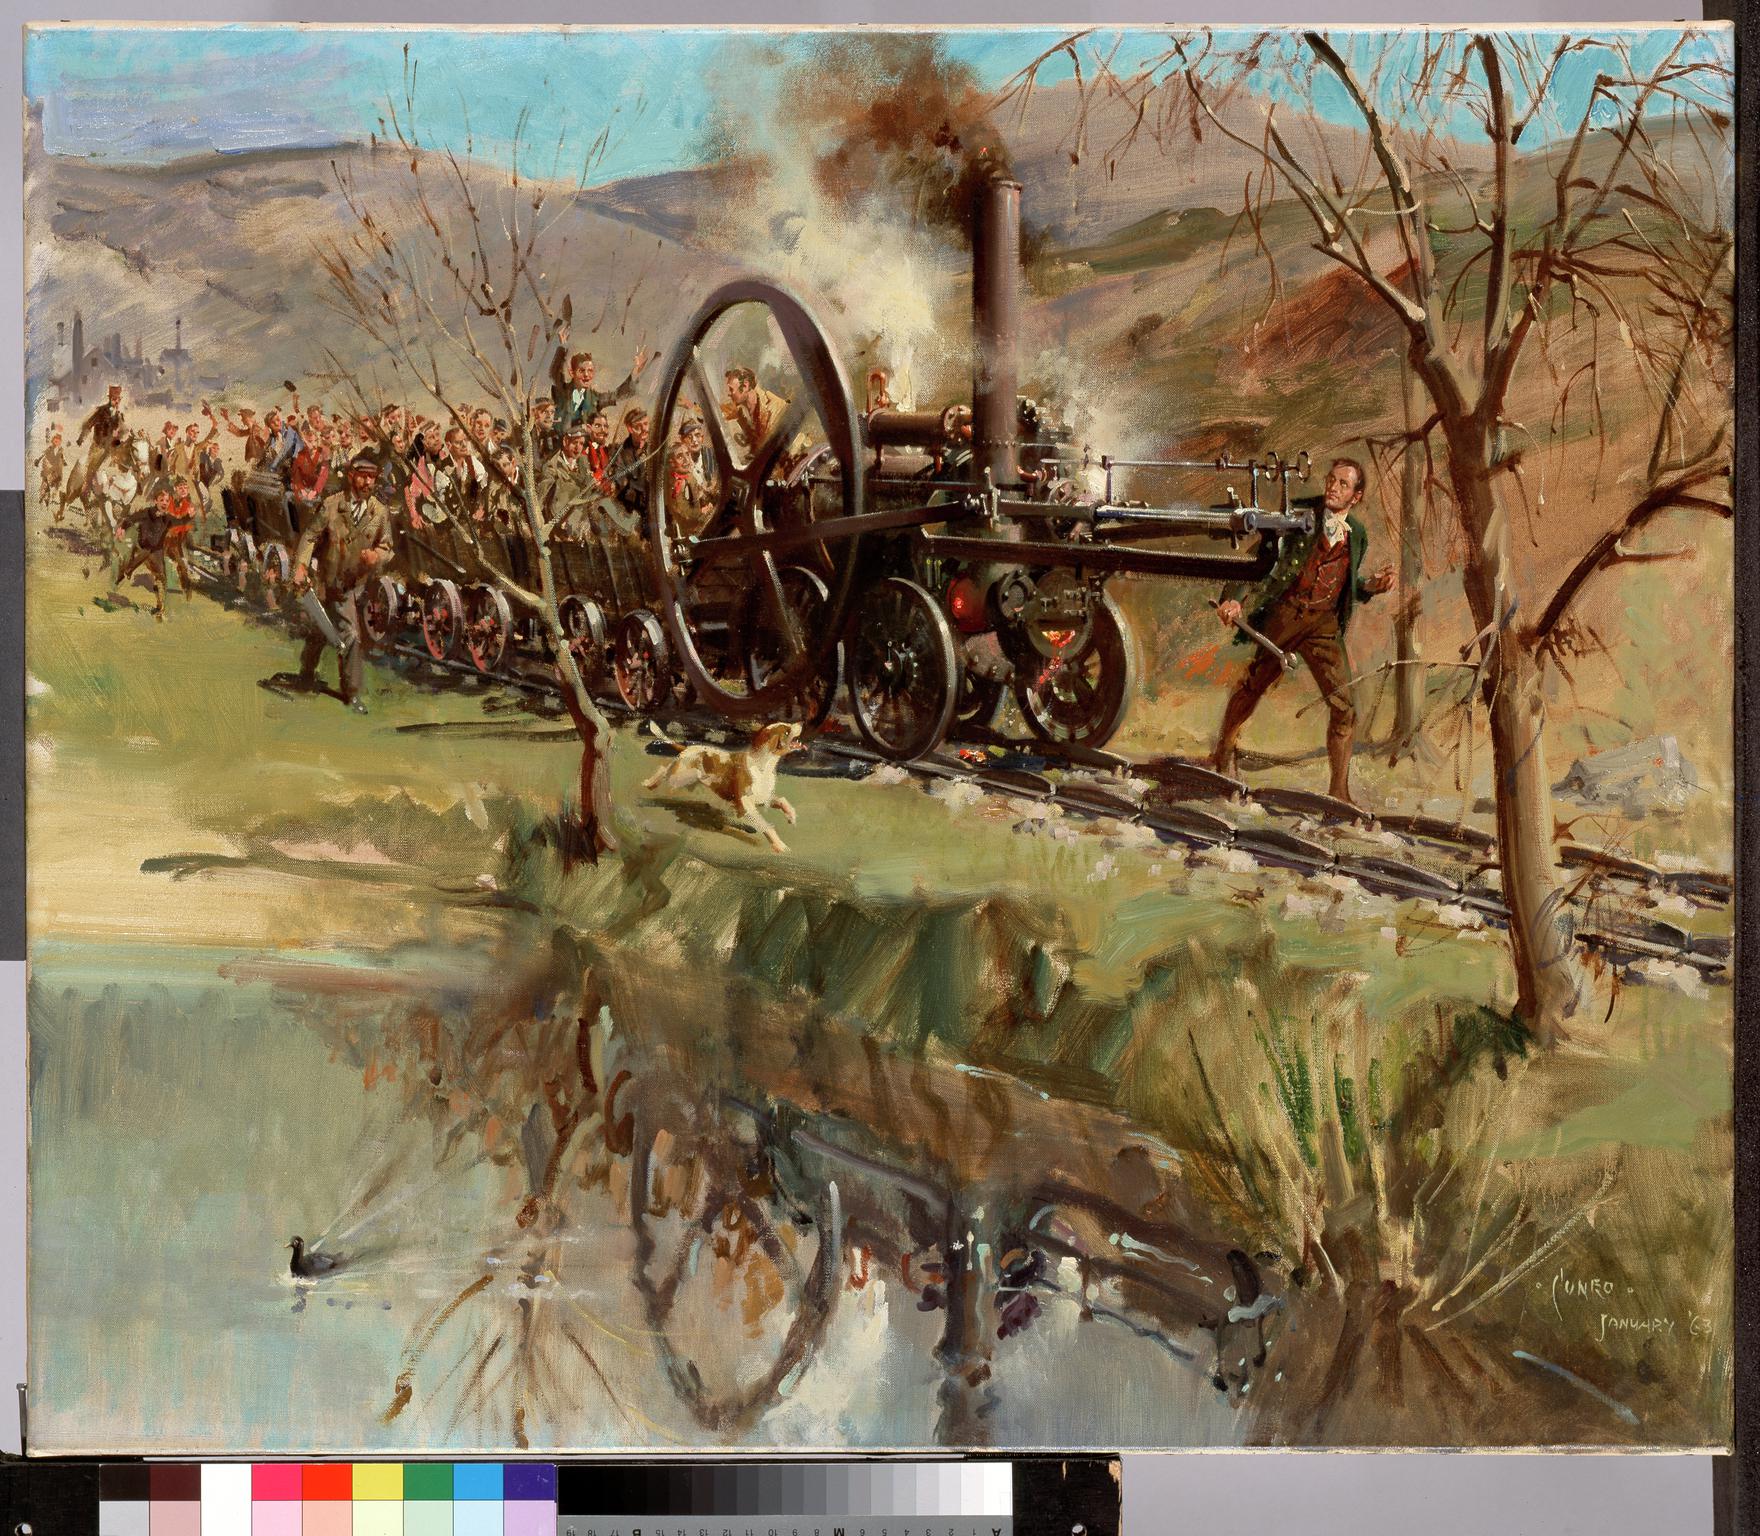 Trevithick's Penydarren Locomotive on its Epic Journey from Merthyr to Abercynon, 21 Feb. 1804 (painting)